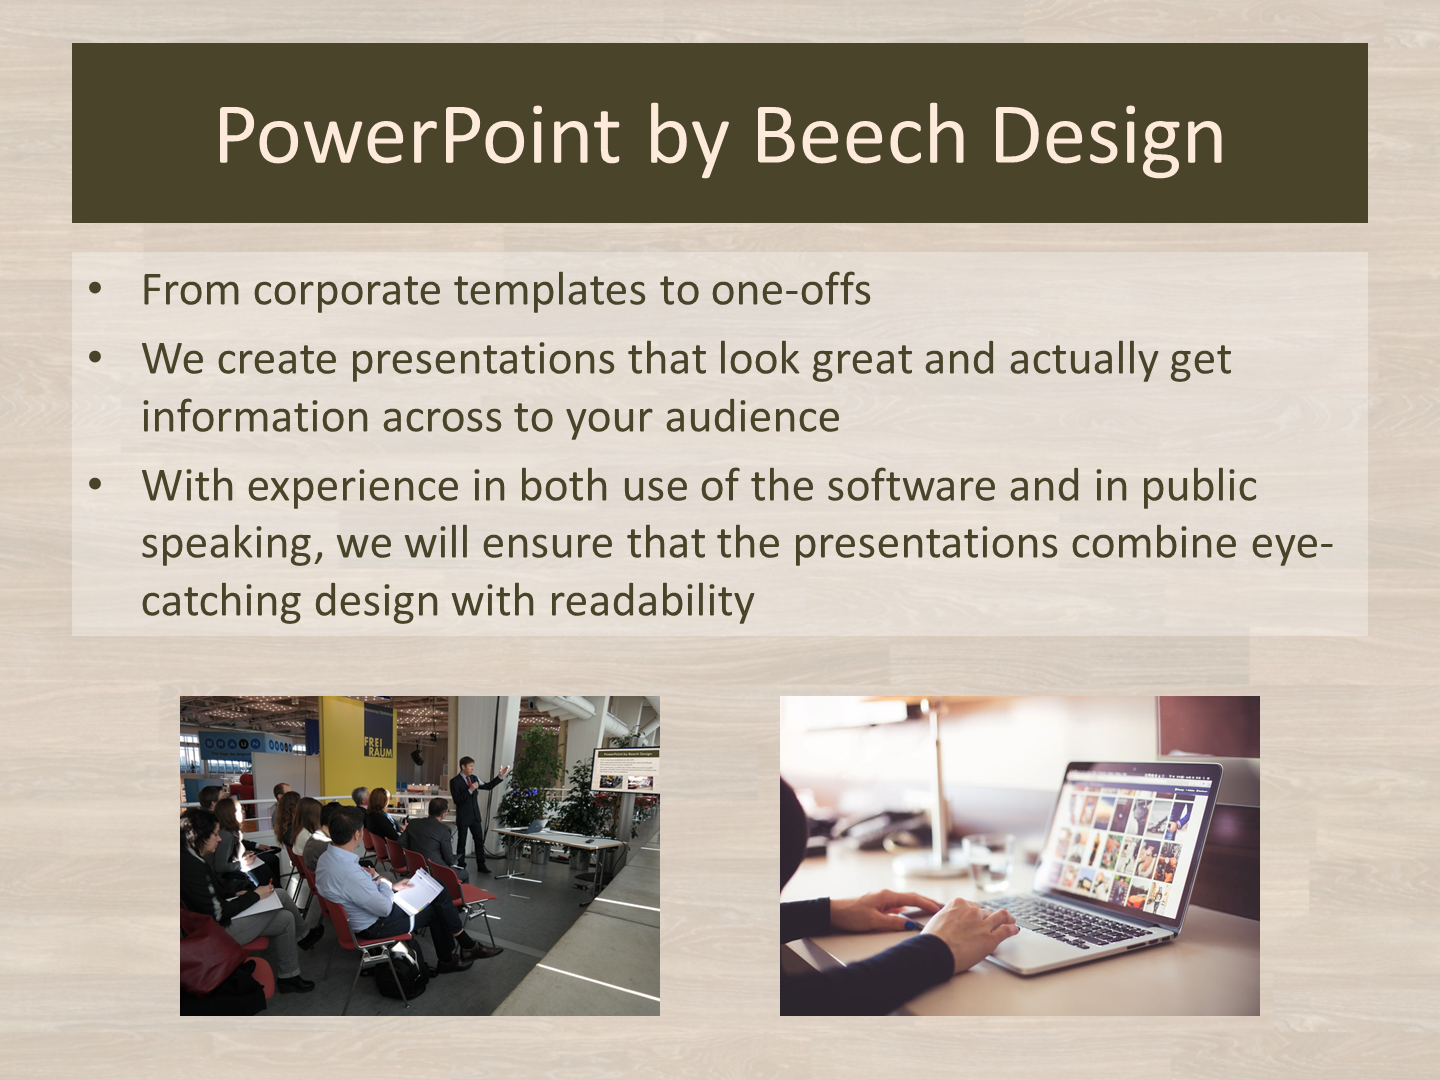 www.beechdesign.co.uk/images/office/powerpoint.ppsx